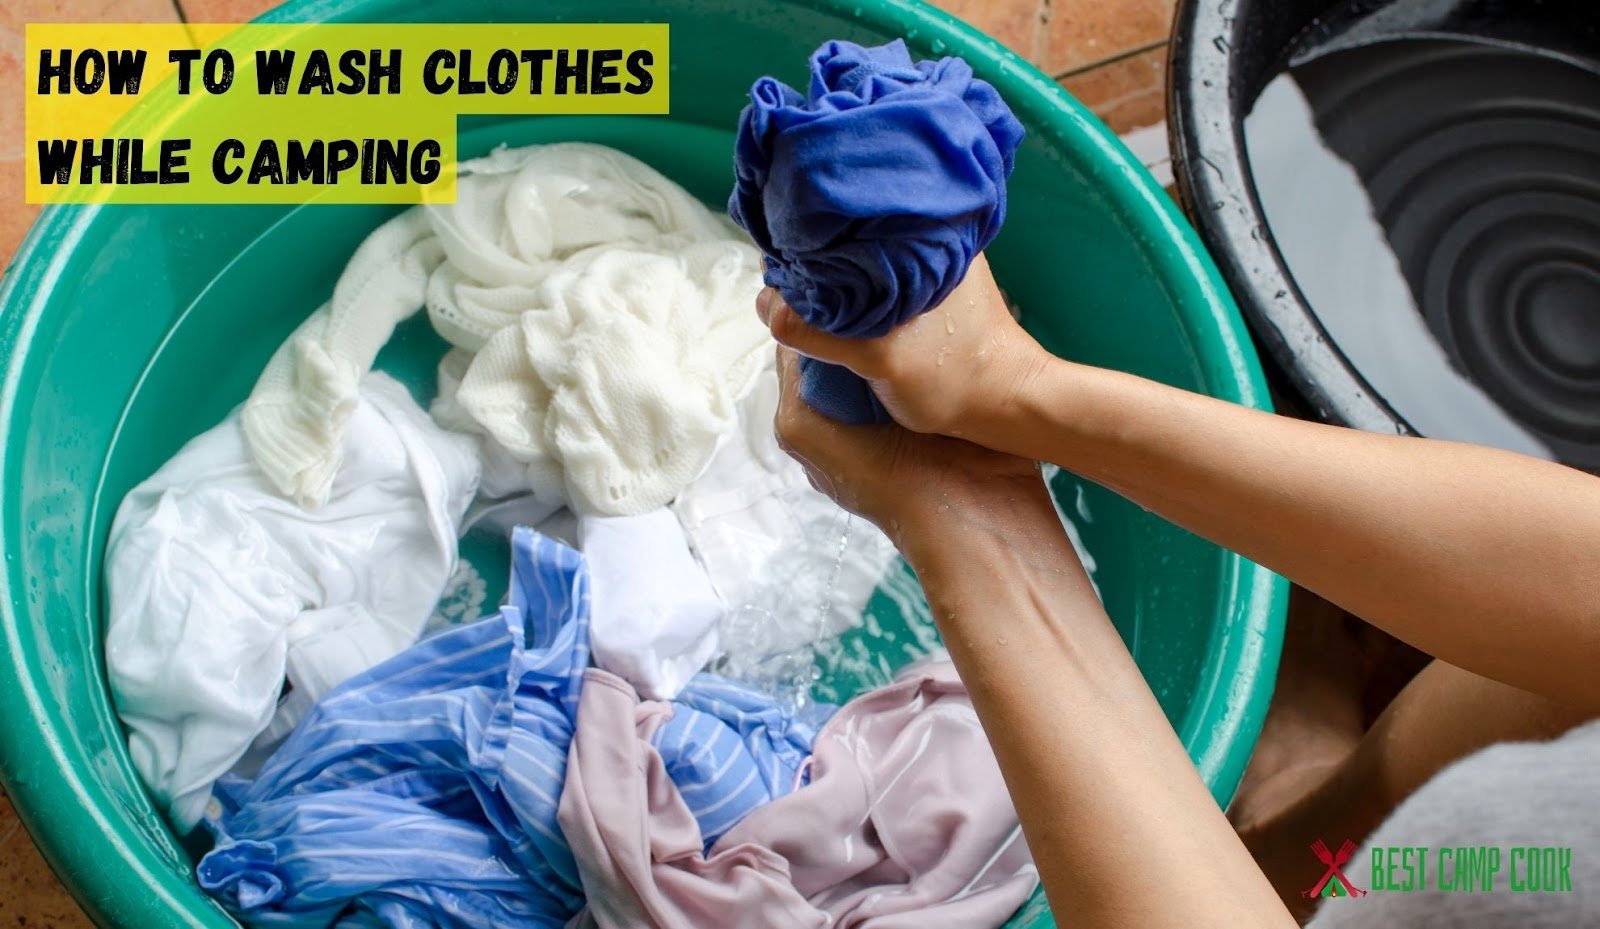 How to wash clothes while camping